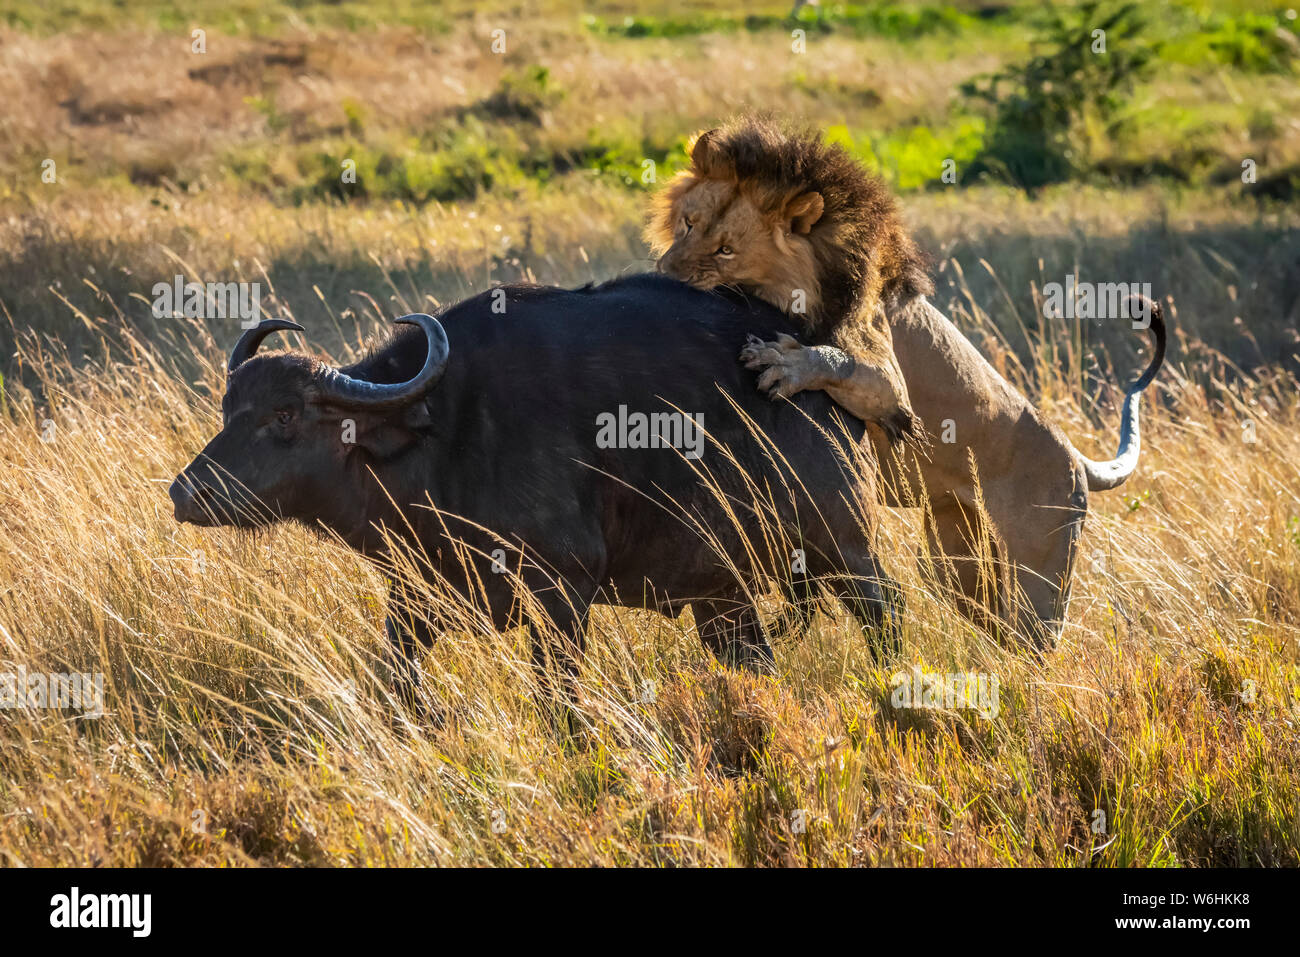 Lion Attack Buffalo High Resolution Stock Photography and Images - Alamy